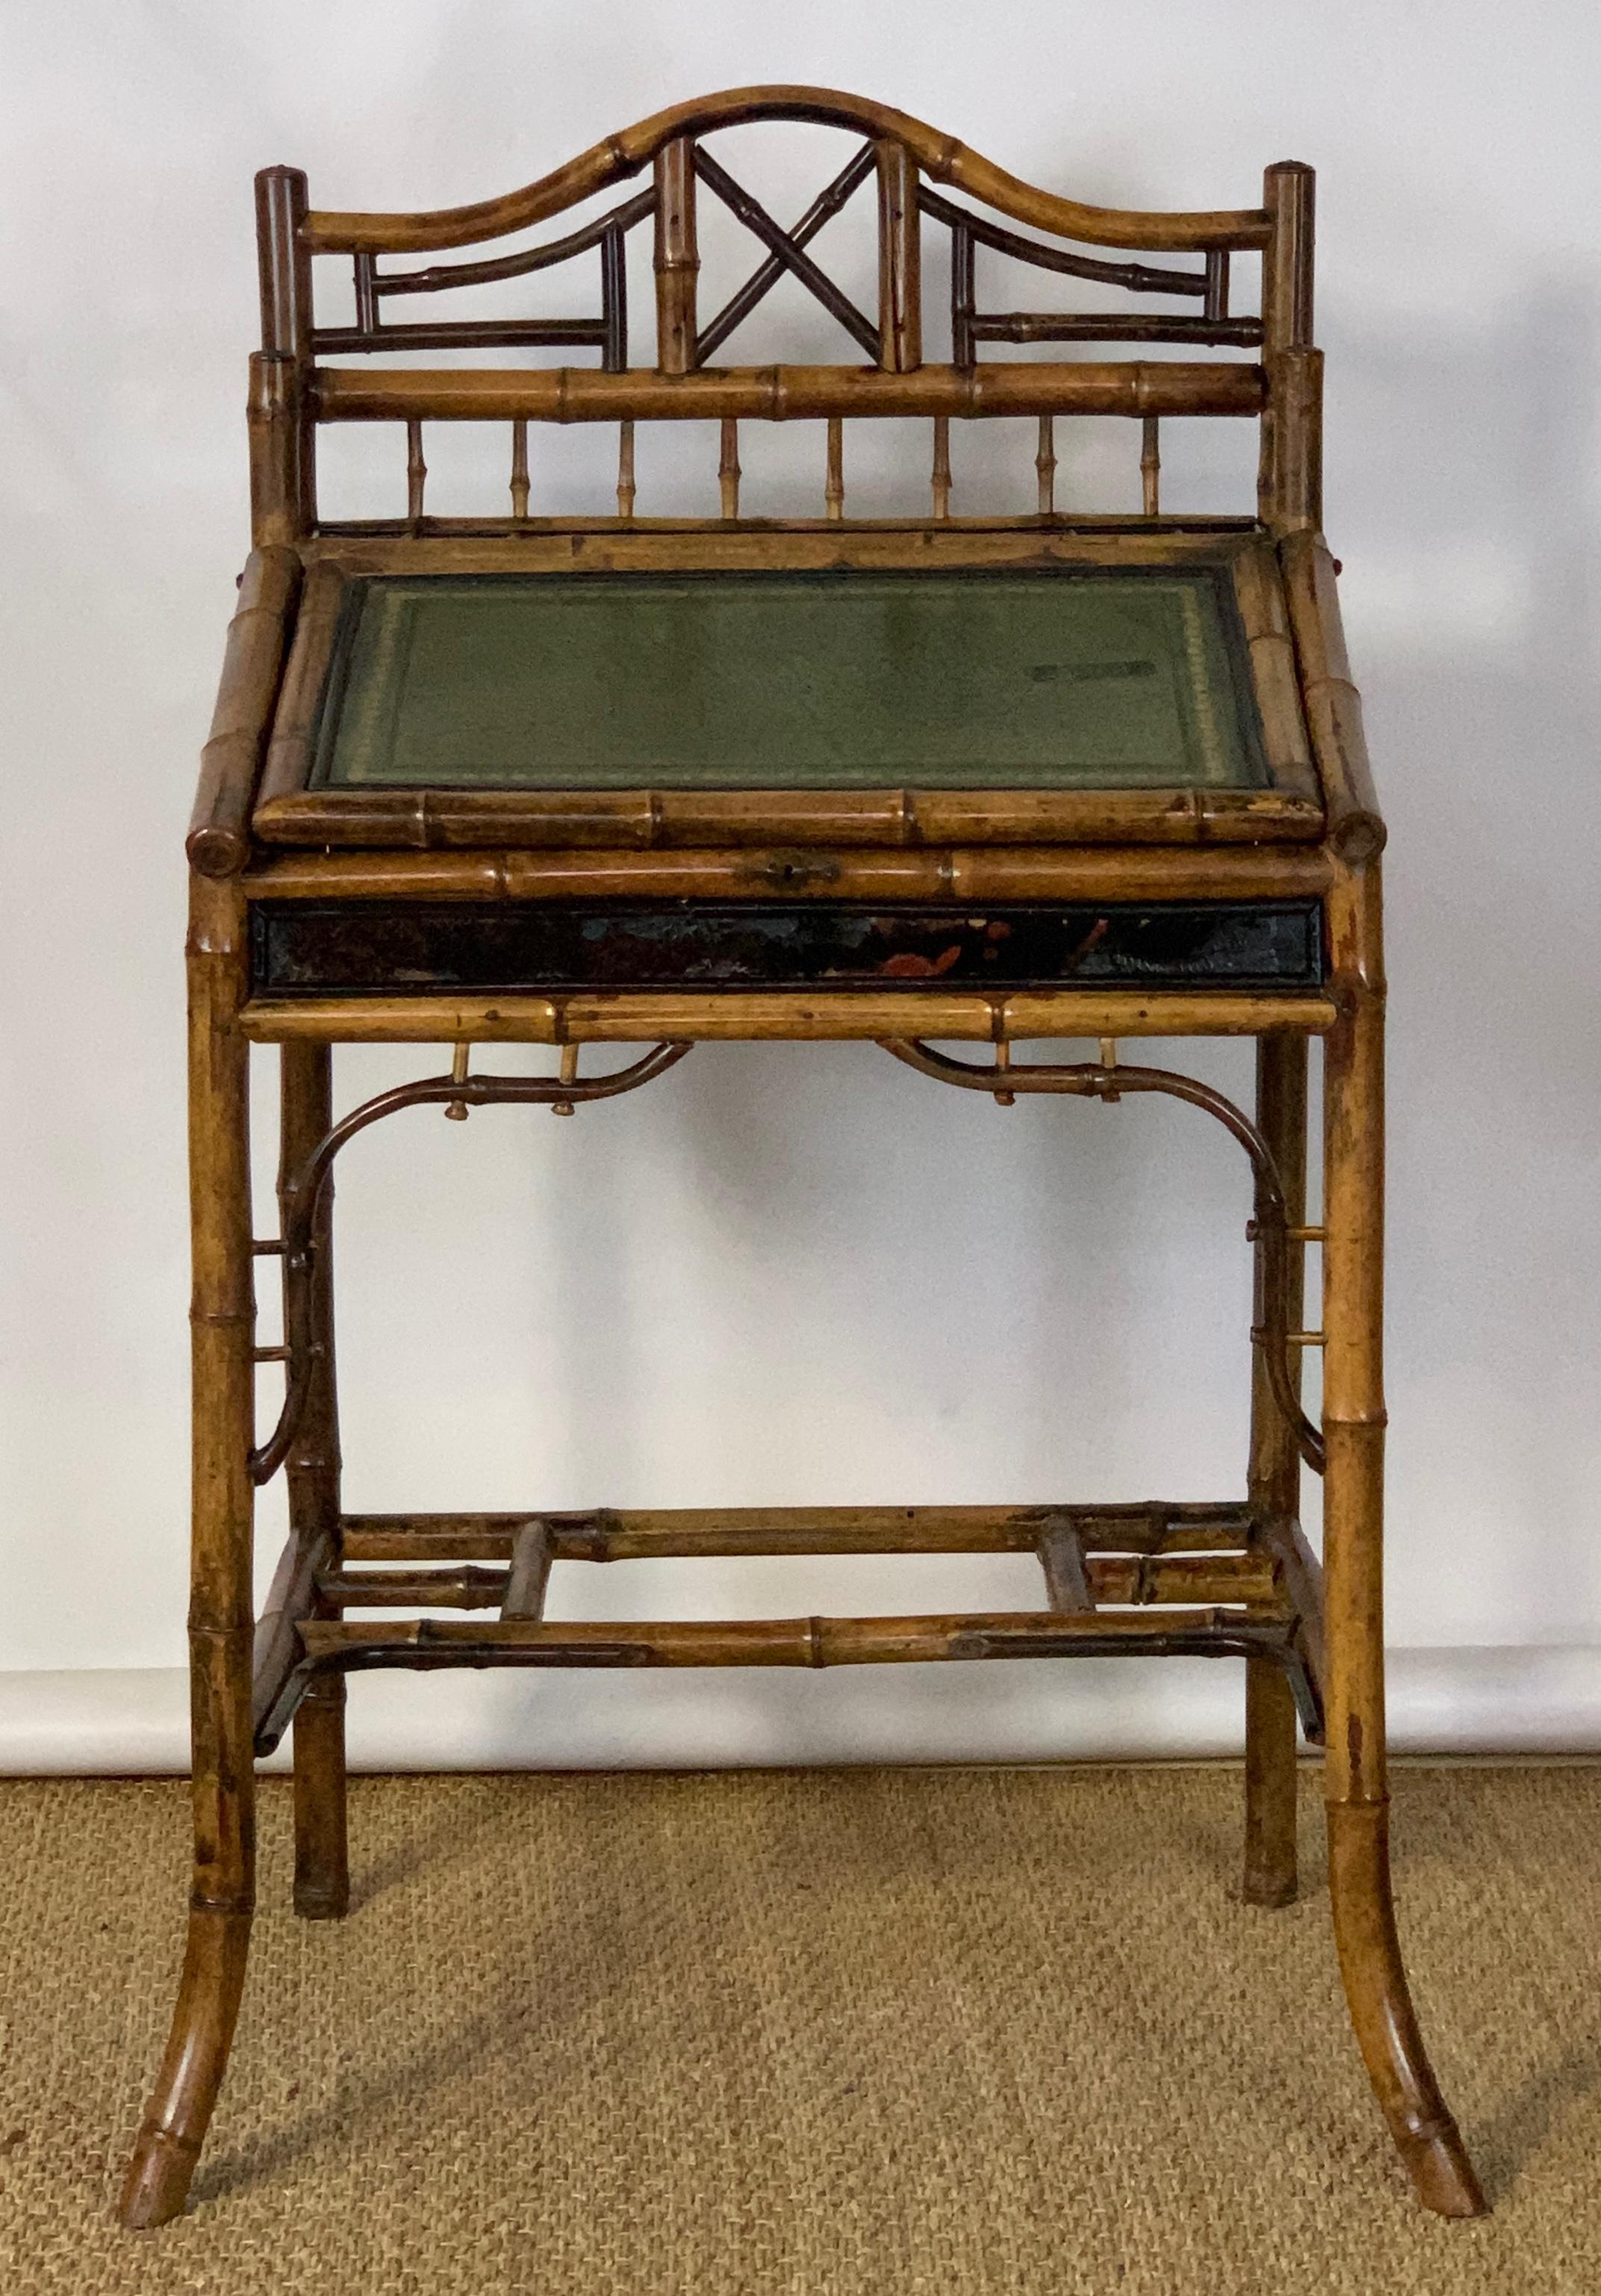 A small and exceptionally charming English late Victorian tortoised bamboo and lacquer writing desk with inset tooled leather slanted and hinged writing surface opening to reveal a storage compartment.